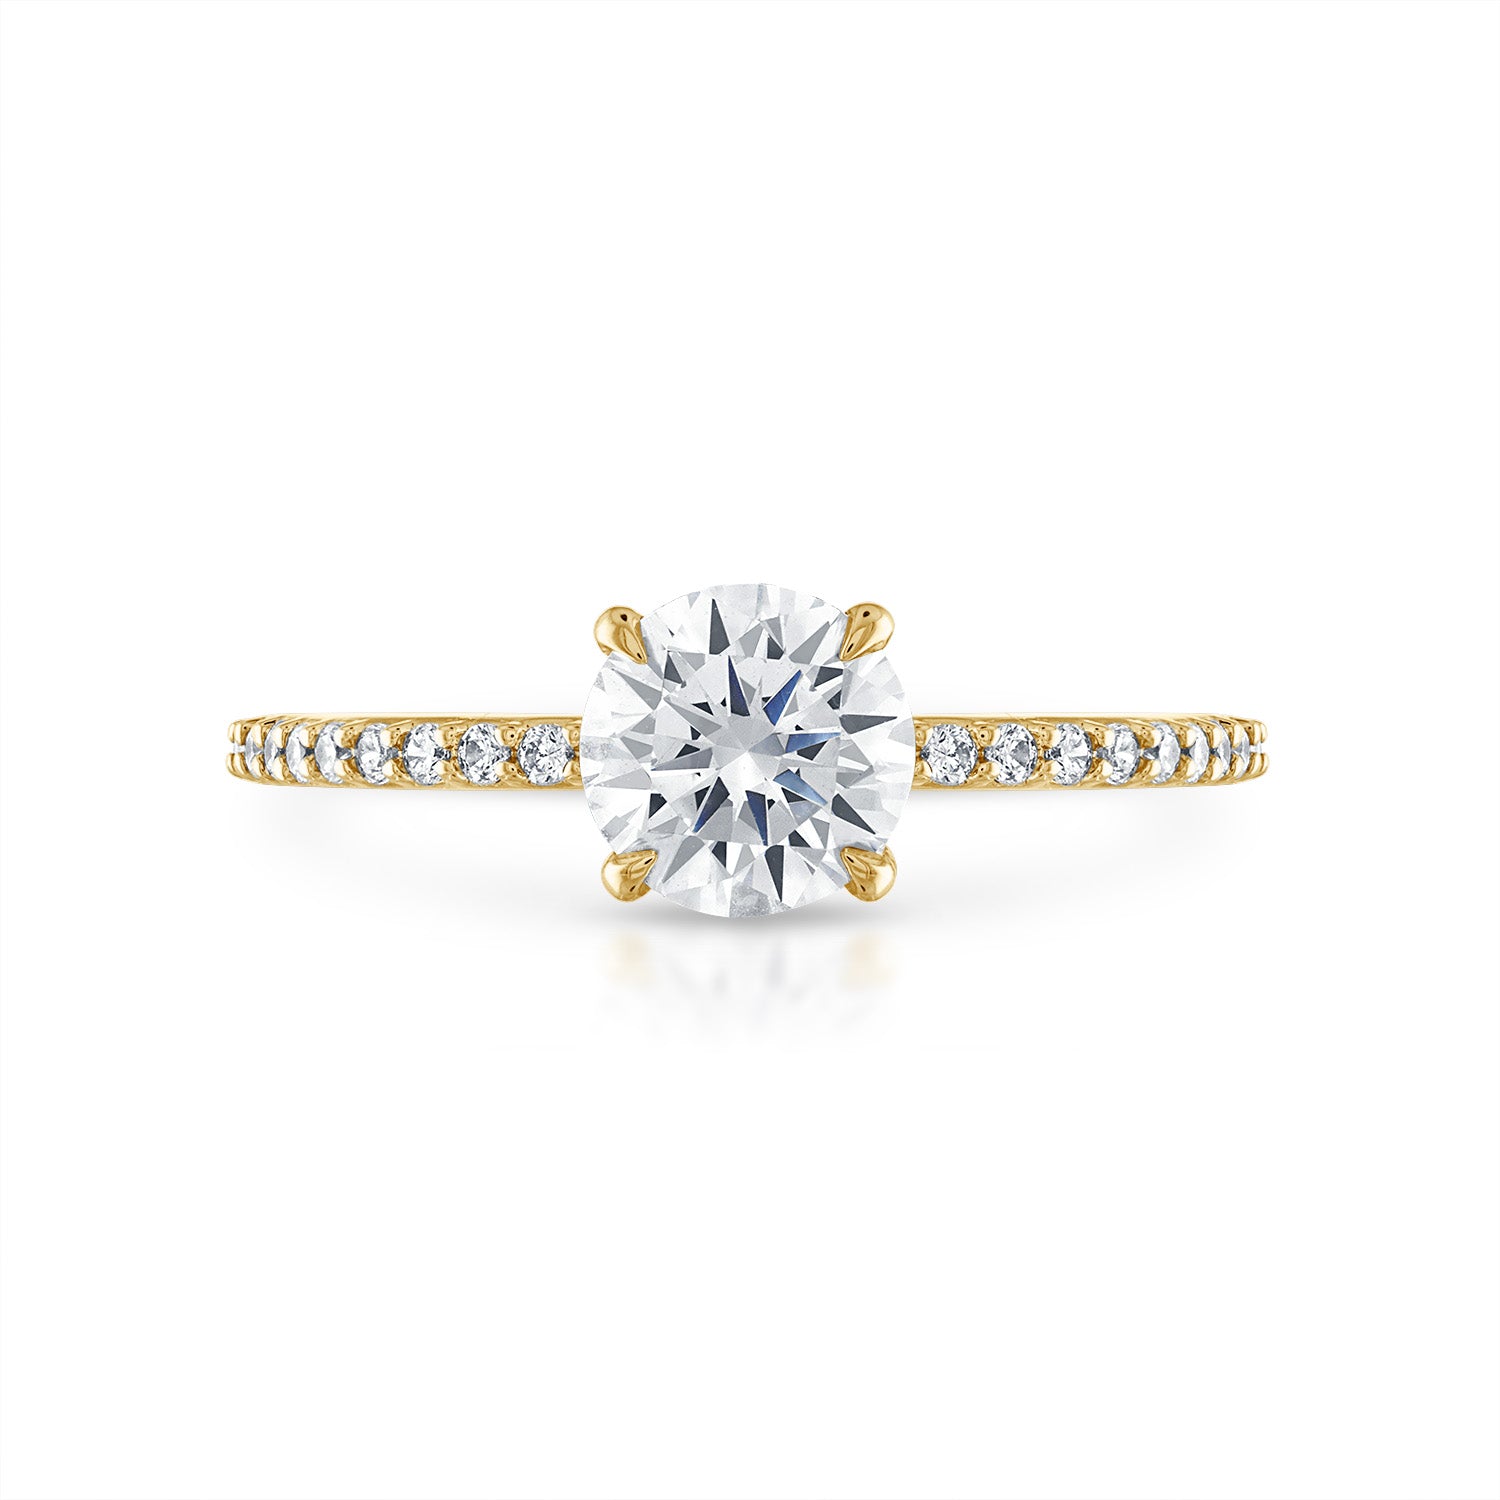 Round Pave with Pave Underbezel Engagement Ring in Yellow Gold